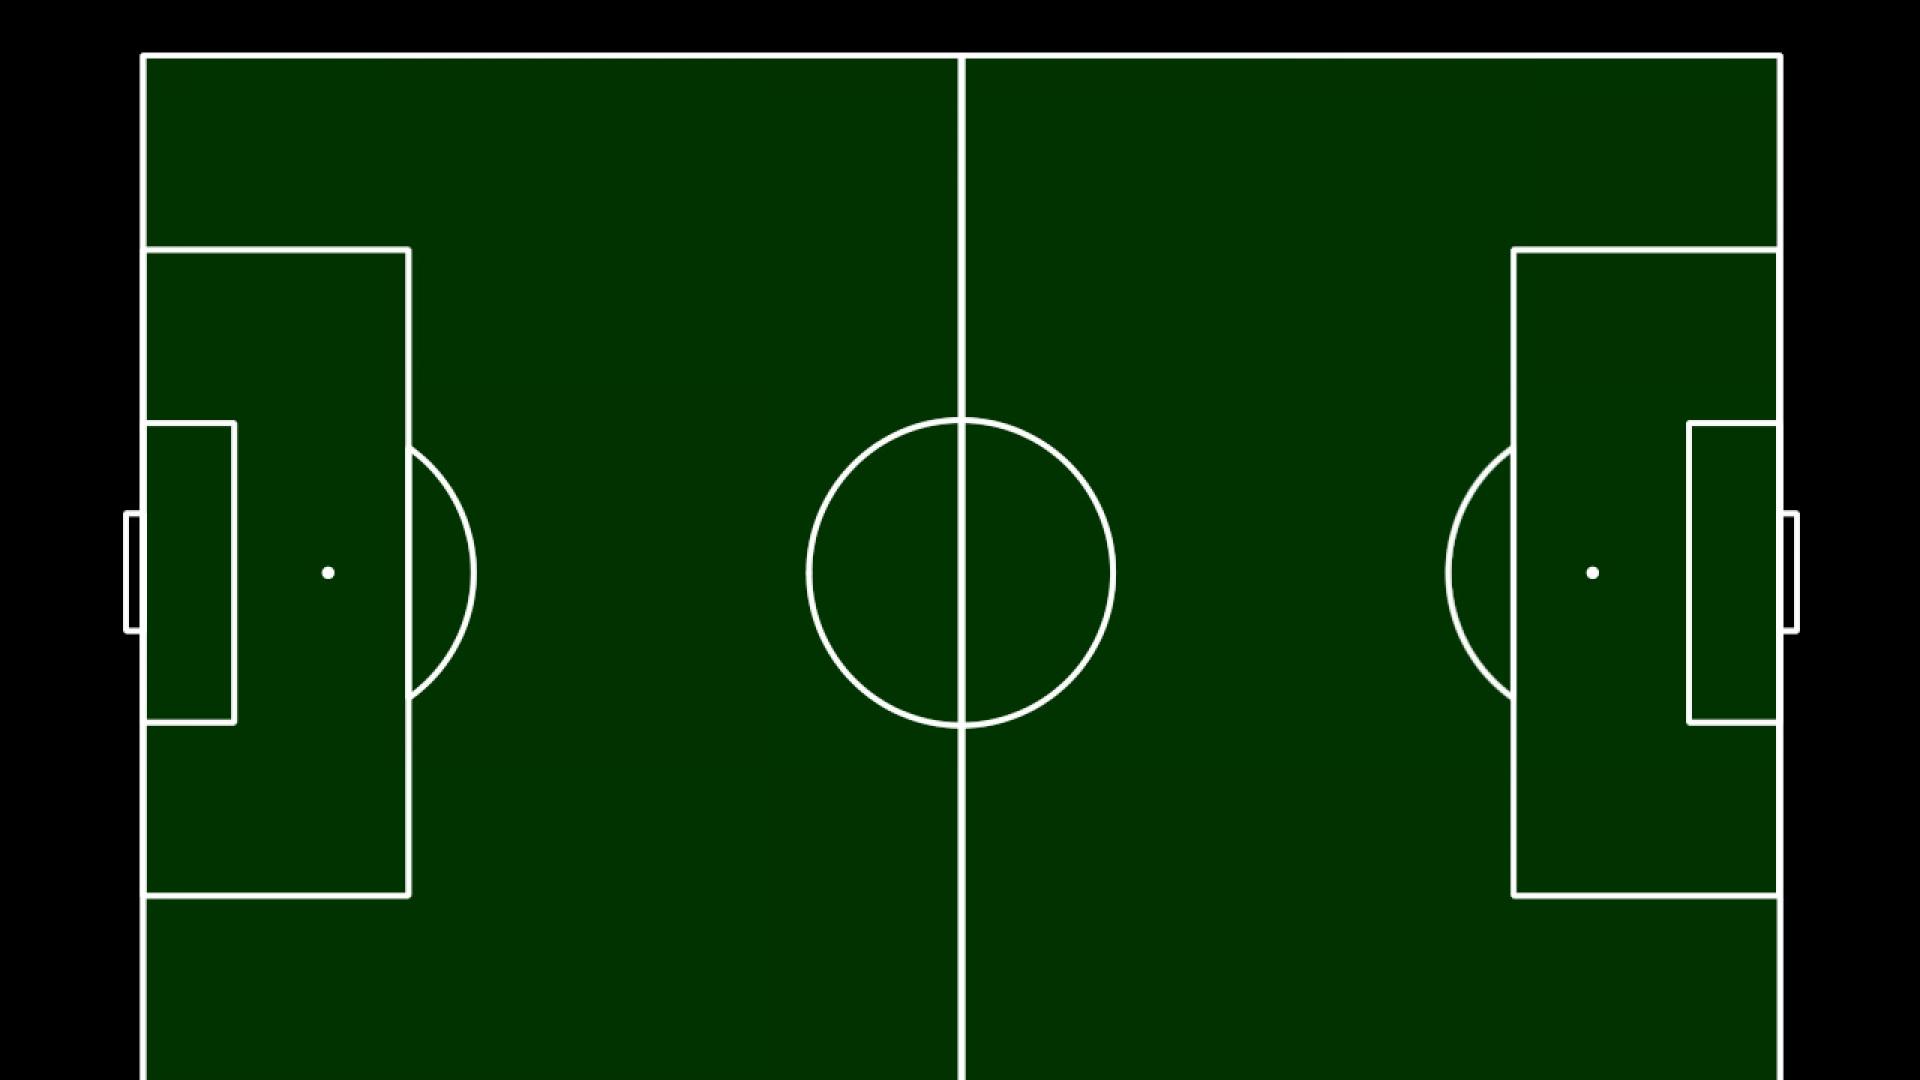 How to create Football Pitches/Goals as Backgrounds in Tableau | by James  Smith | Analytics Vidhya | Medium